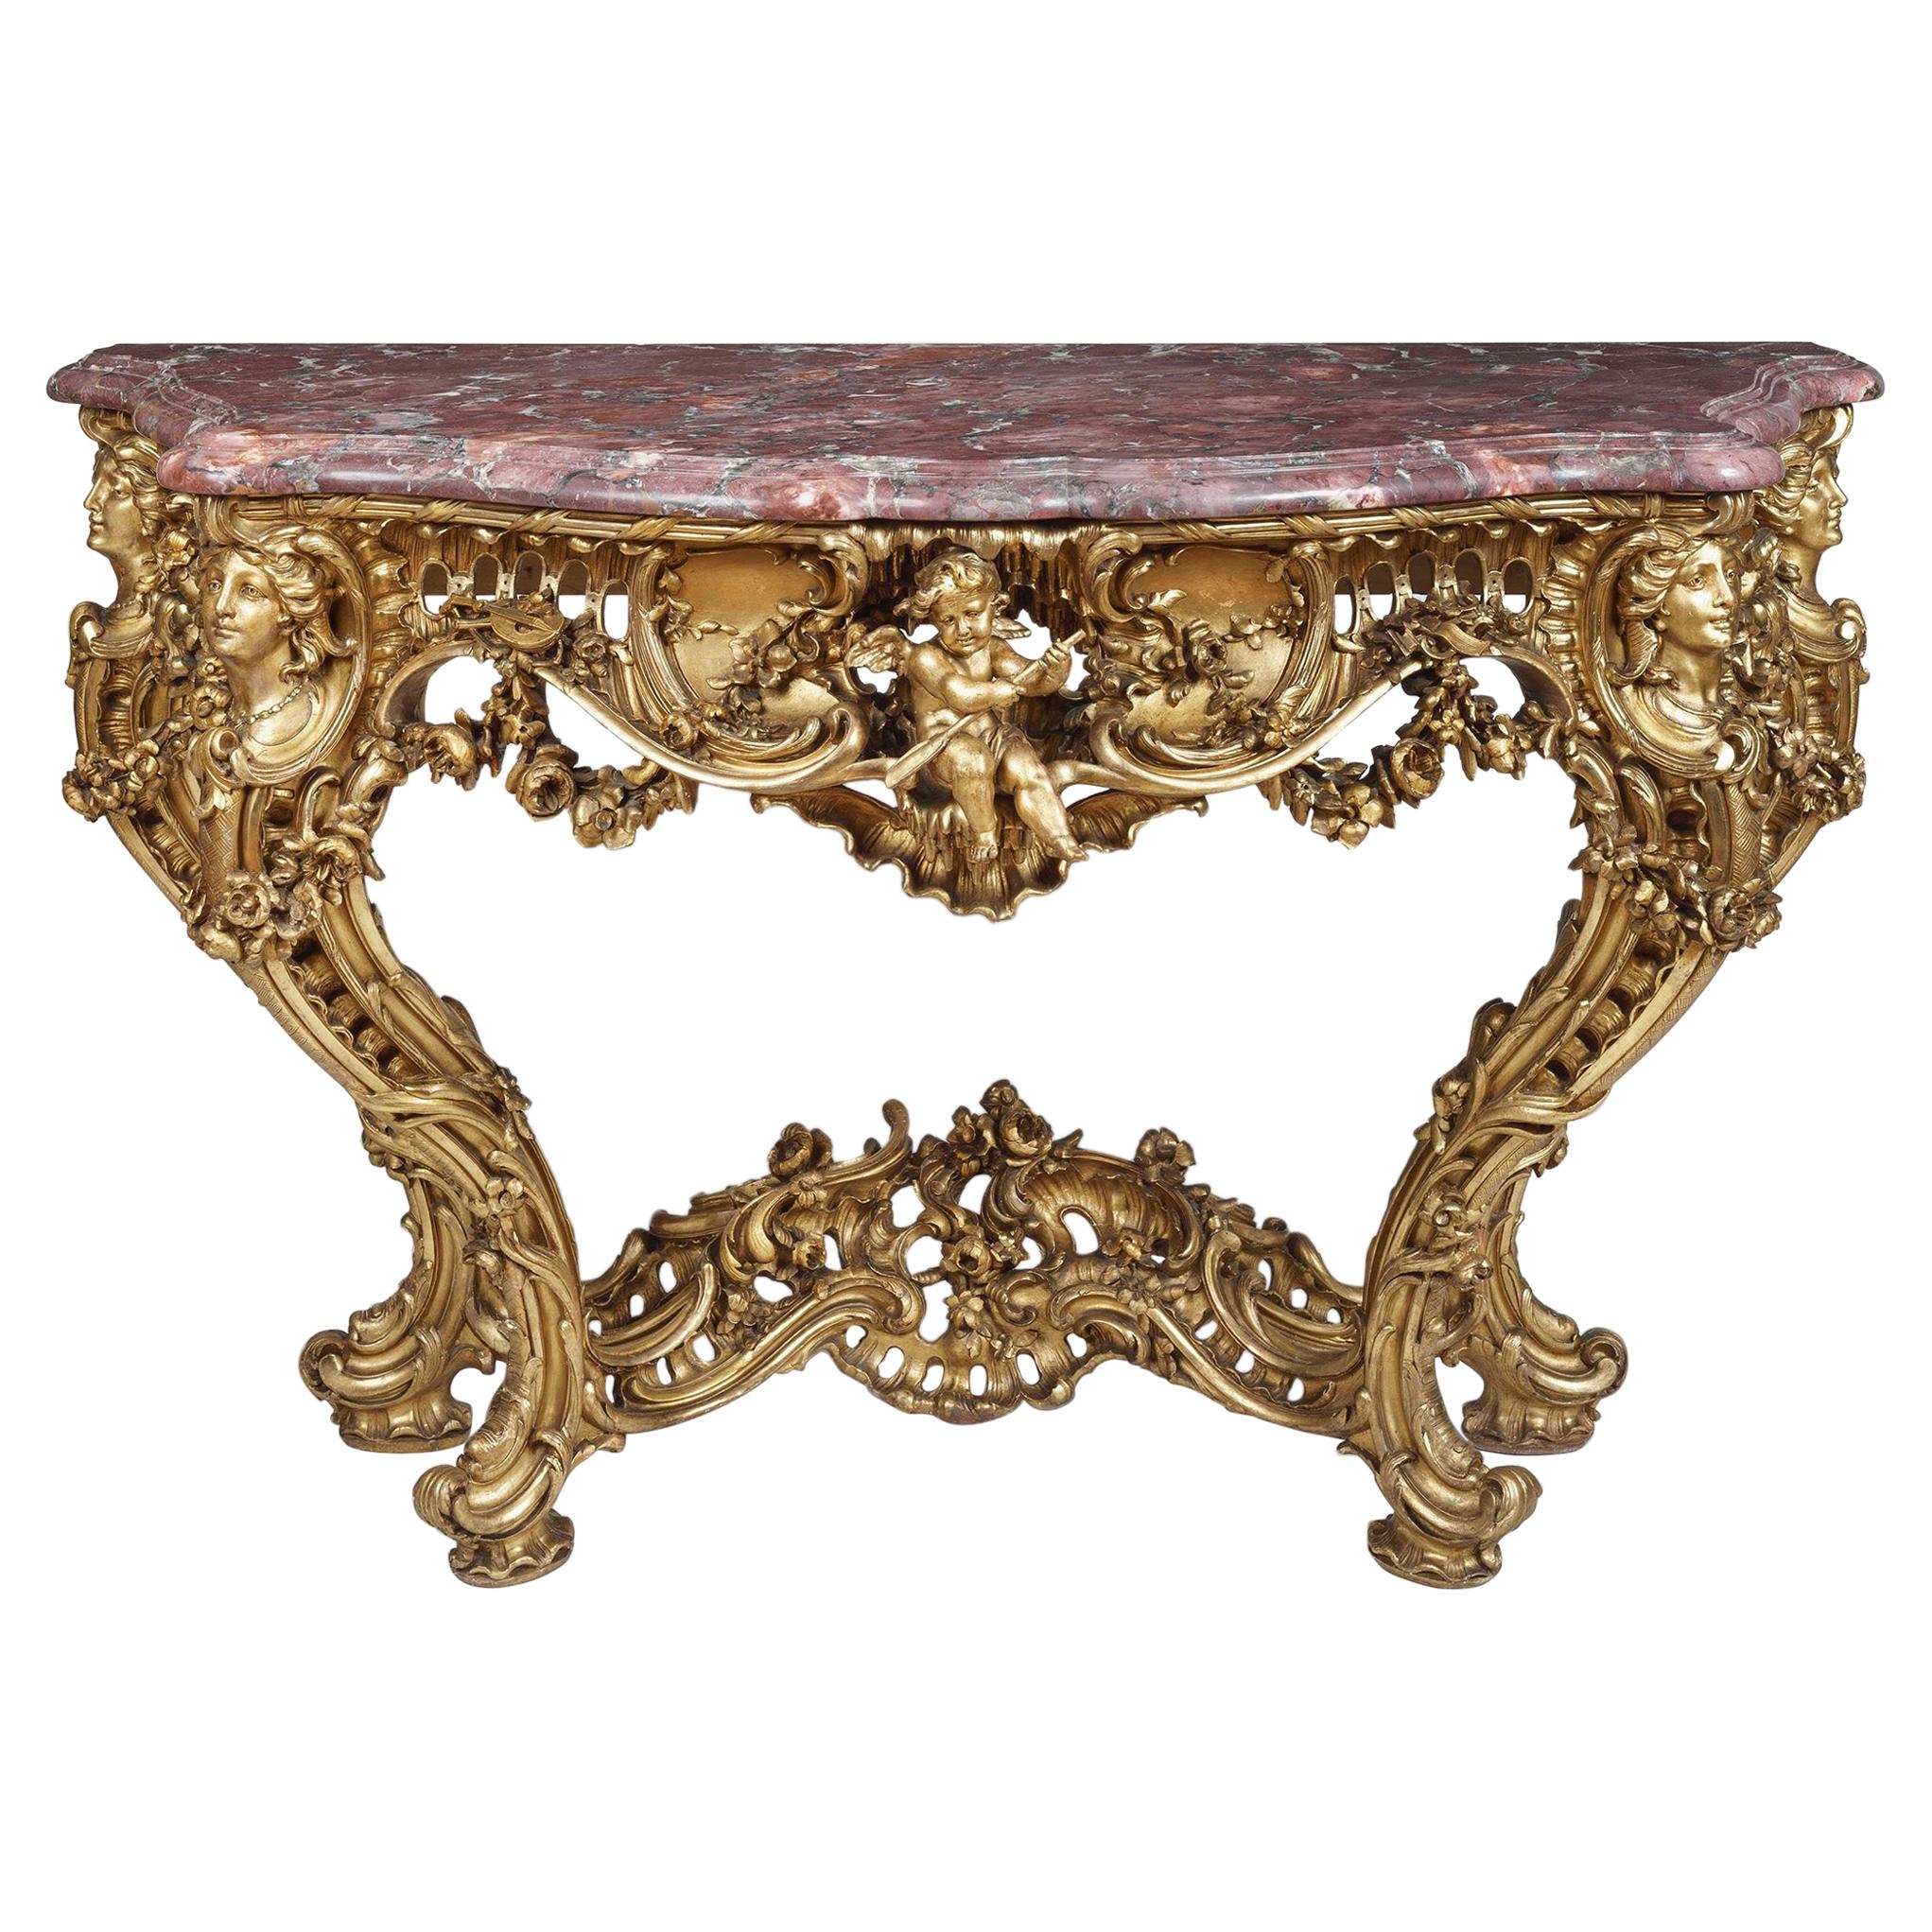 Carved Giltwood Louis XV Style Console Table In the Manner of Nicolas Pineau